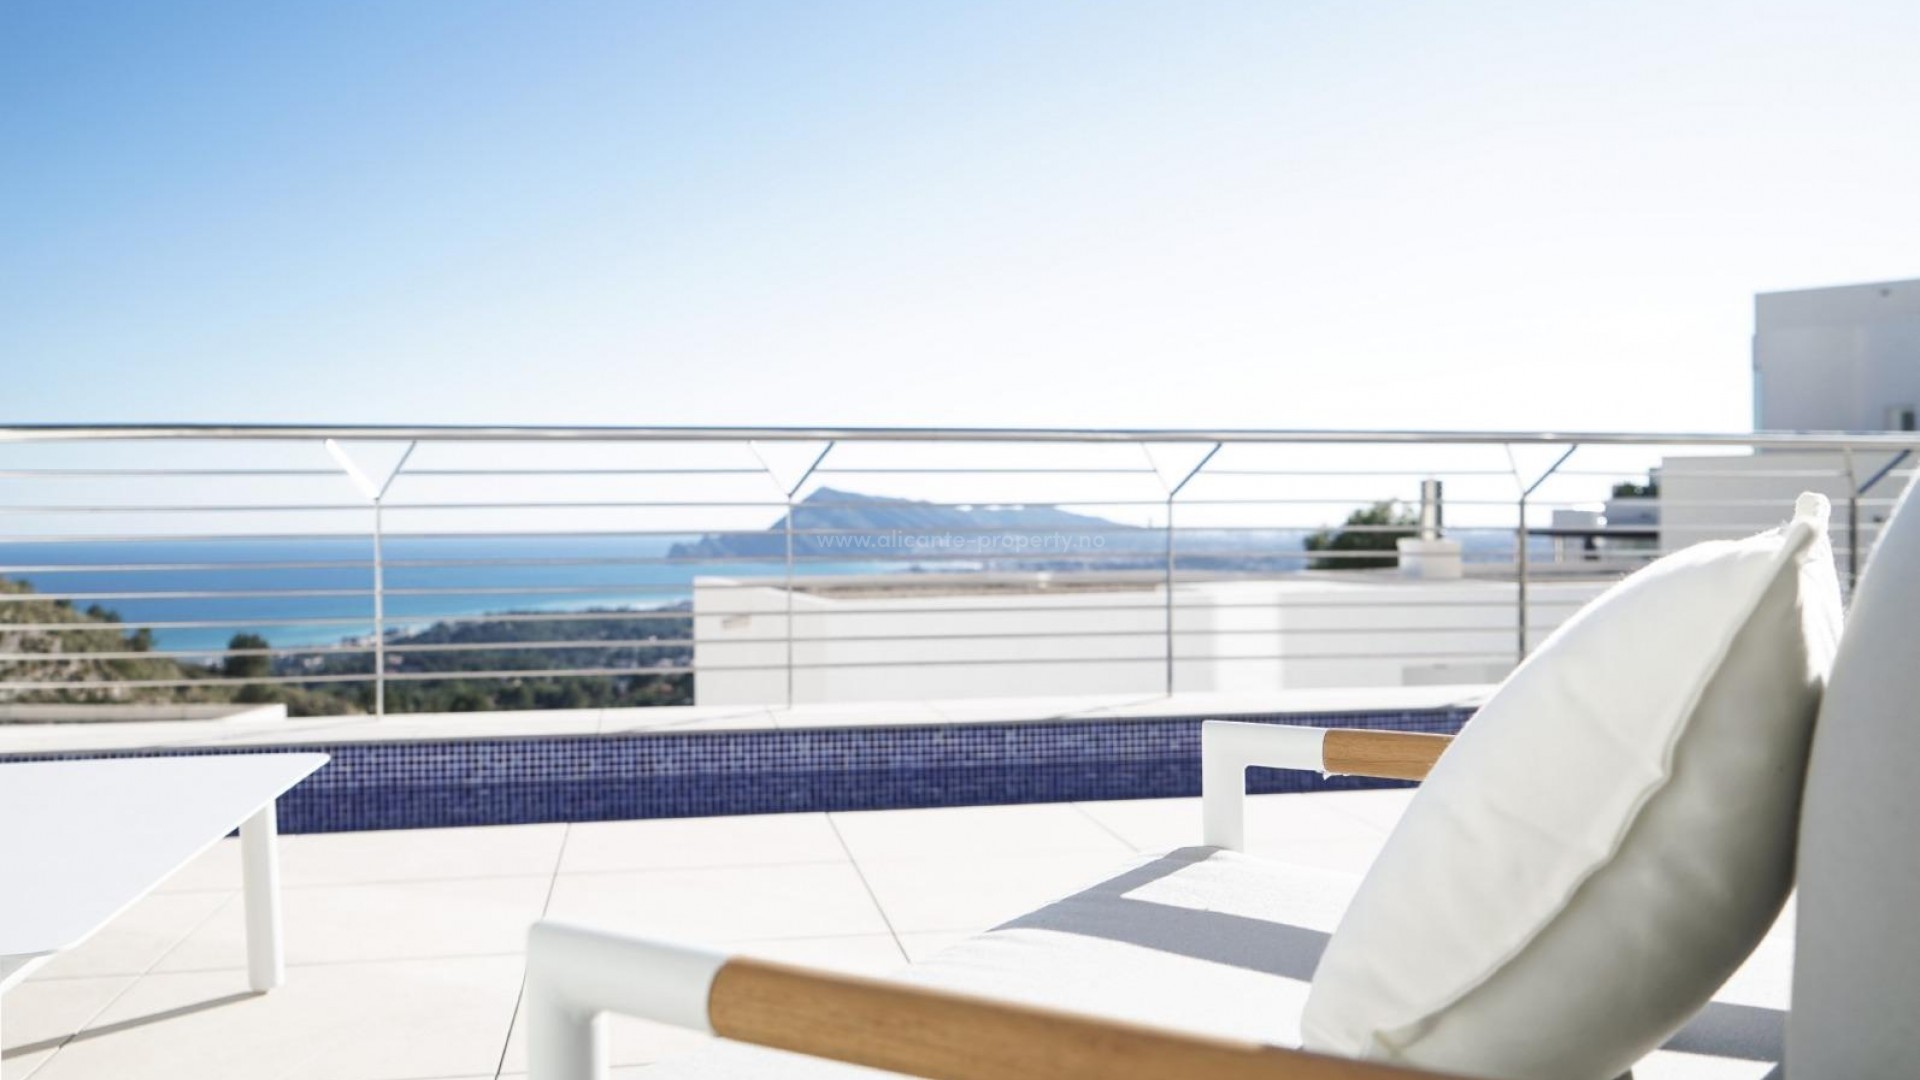 Newly built luxury villa in Altea, 5 bedrooms, 6 bathrooms, terrace, swimming room, barbecue, locked garage and lift. Panoramic views of the Mediterranean Sea and Benidorm's skyline